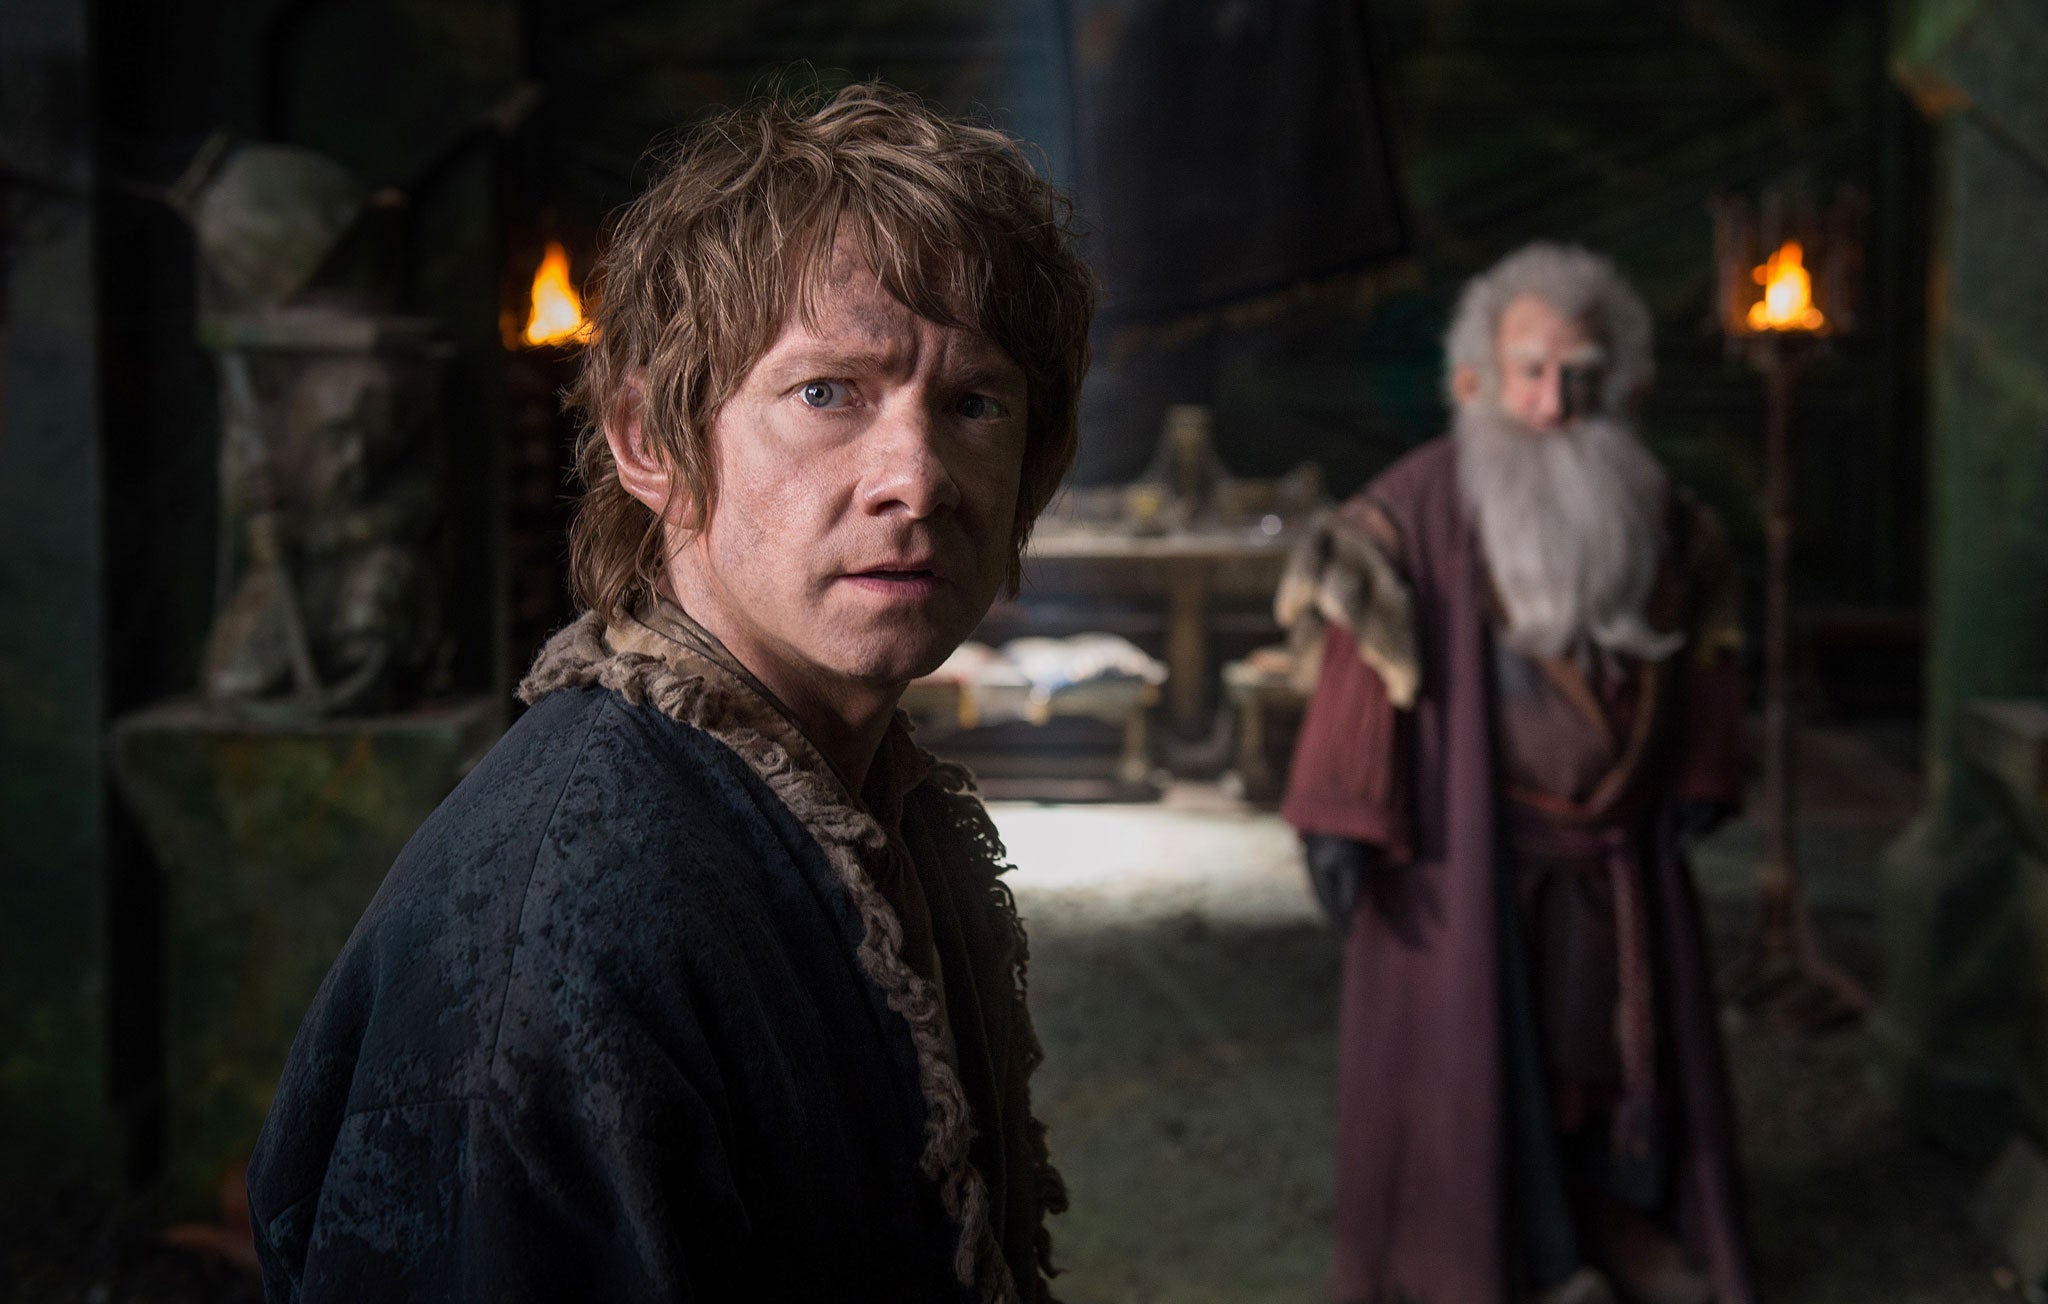 Freeman as Bilbo Baggins in 'The Hobbit: The Battle of the Five Armies'